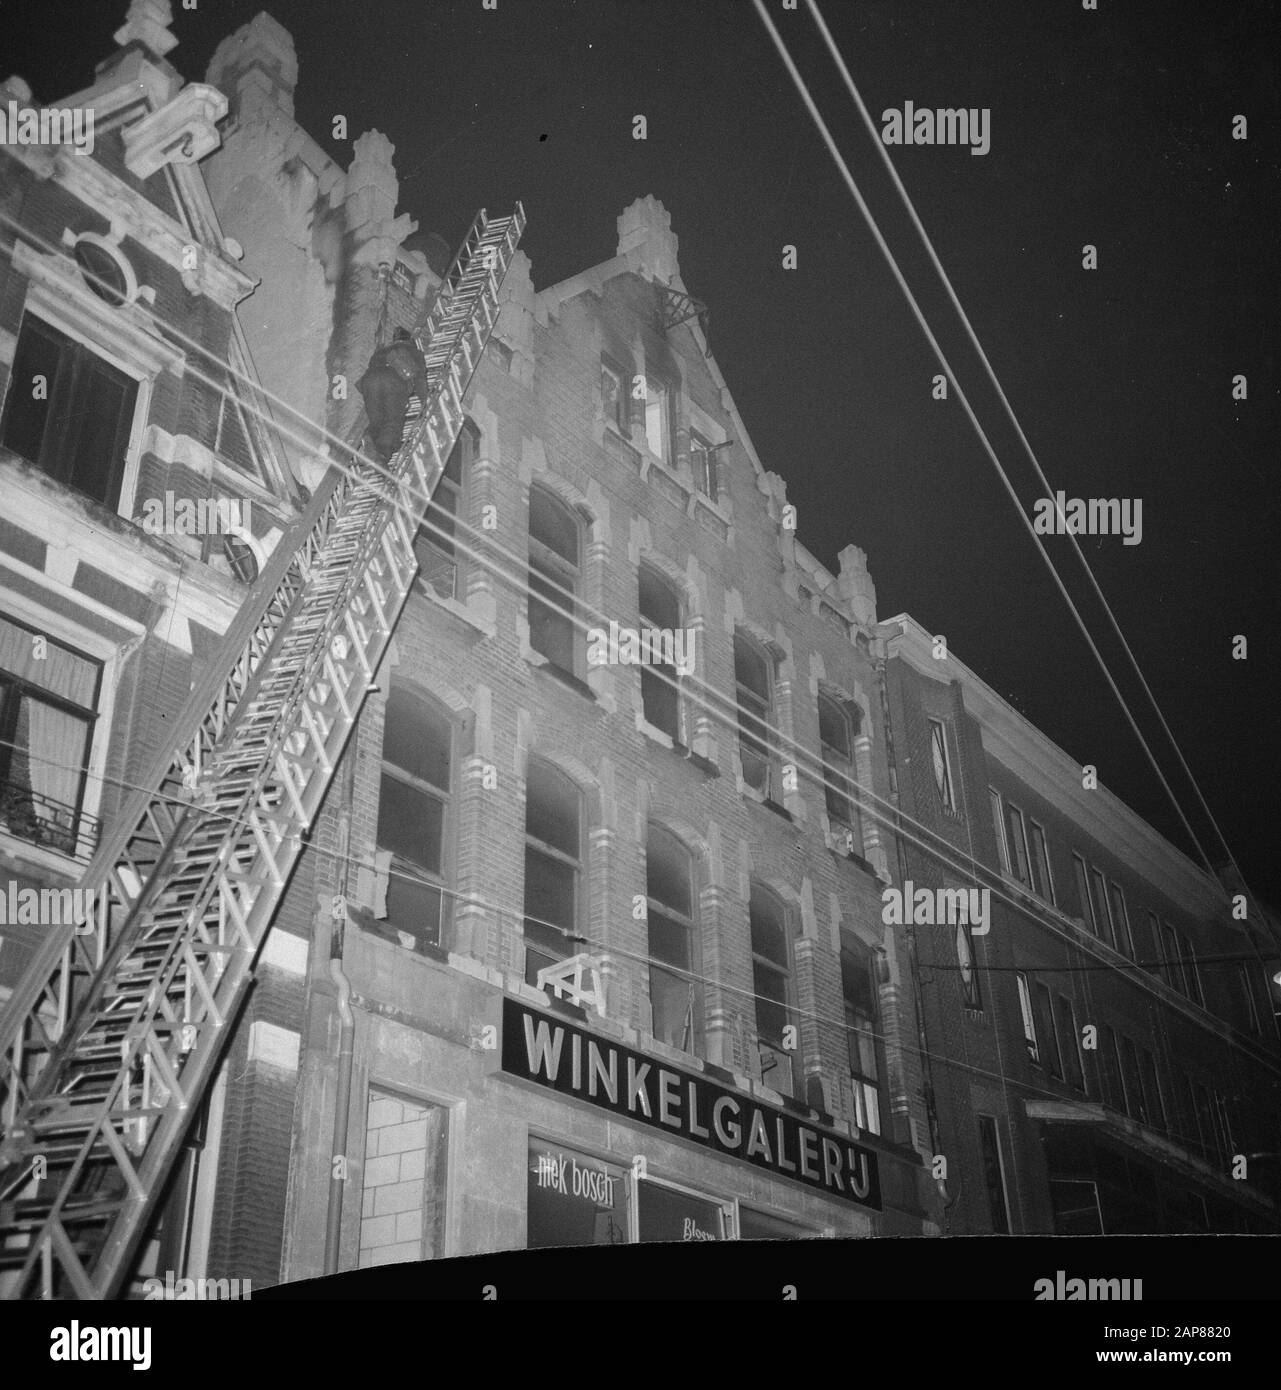 Brand aan Amstel number 50 above shopping gallery. Fire brigade during extinguishing Date: January 2, 1968 Keywords: FIRE, extinguishing, fires, galleries, shops Personal name: Amstel Stock Photo